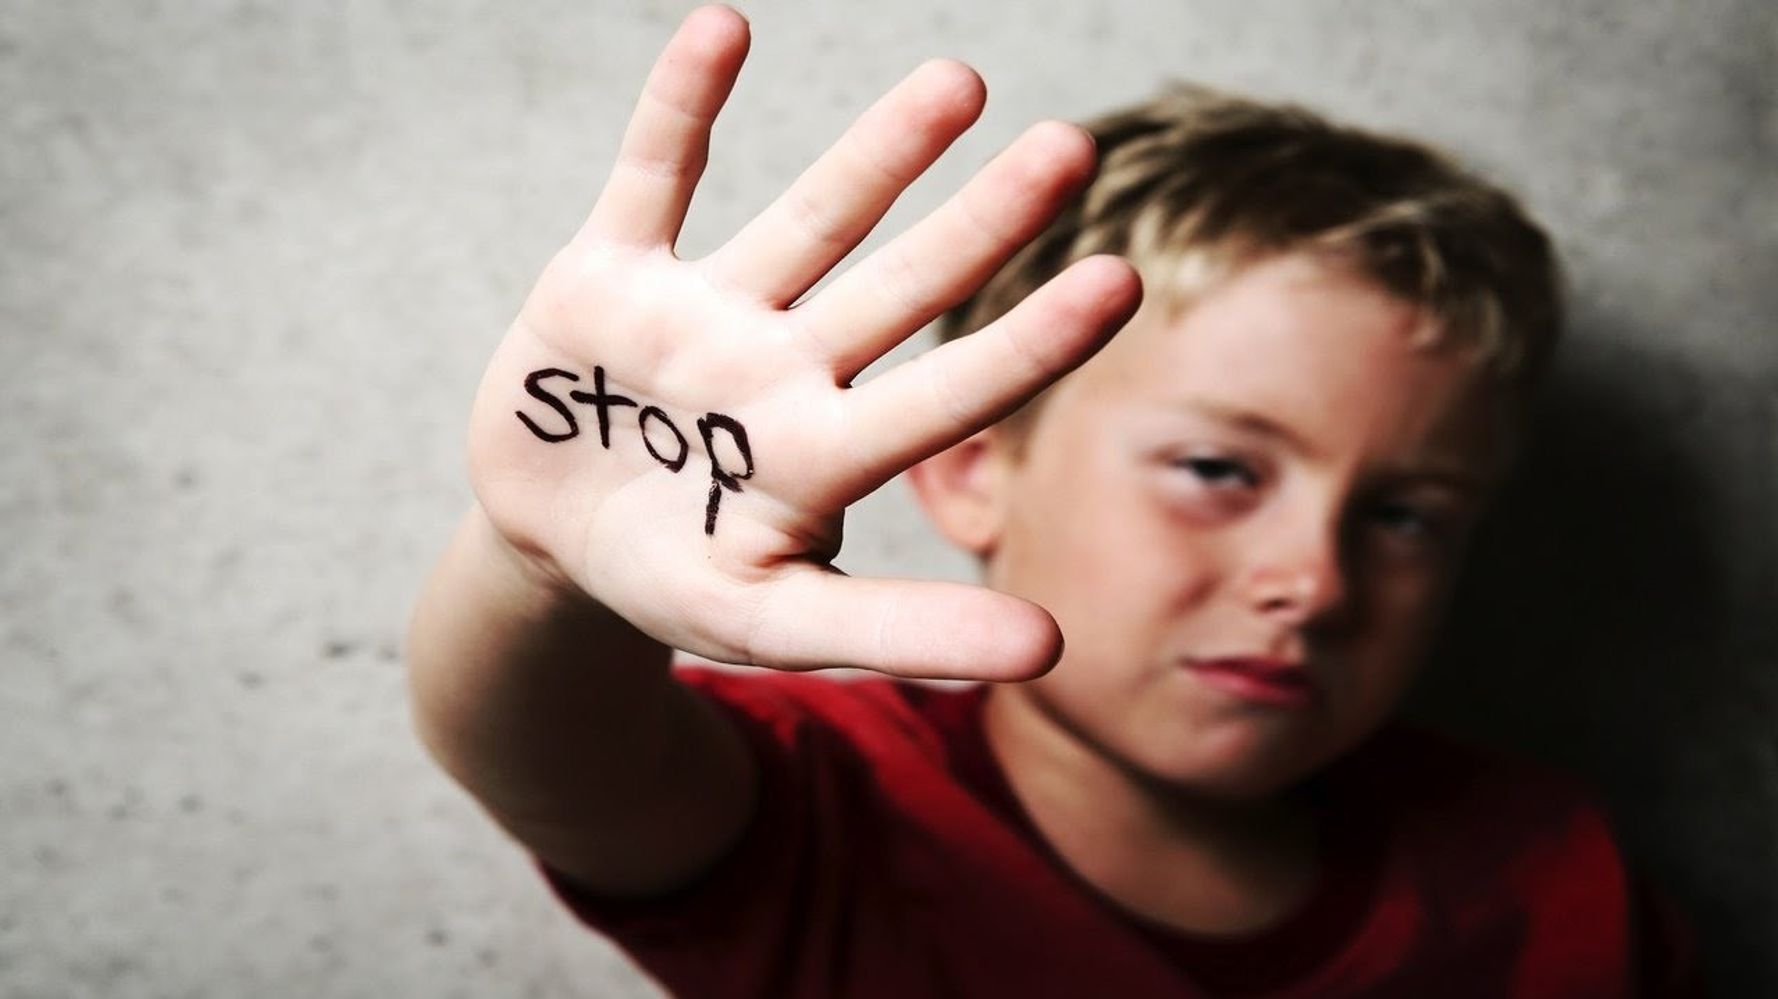 How To Stop Parental Abuse?